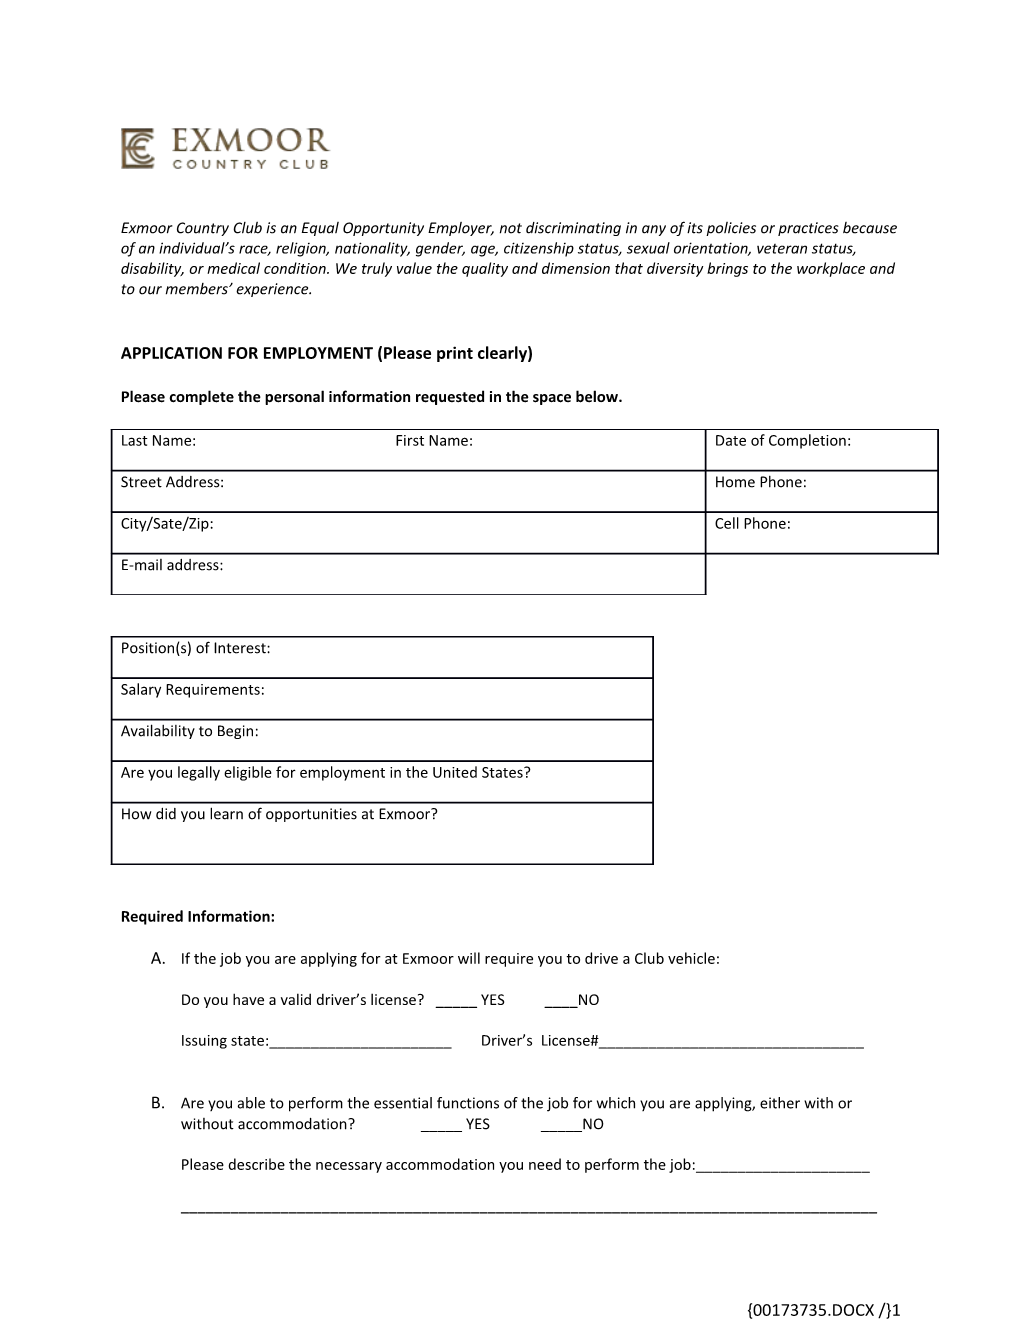 Further Revised Employment Application (00173735)